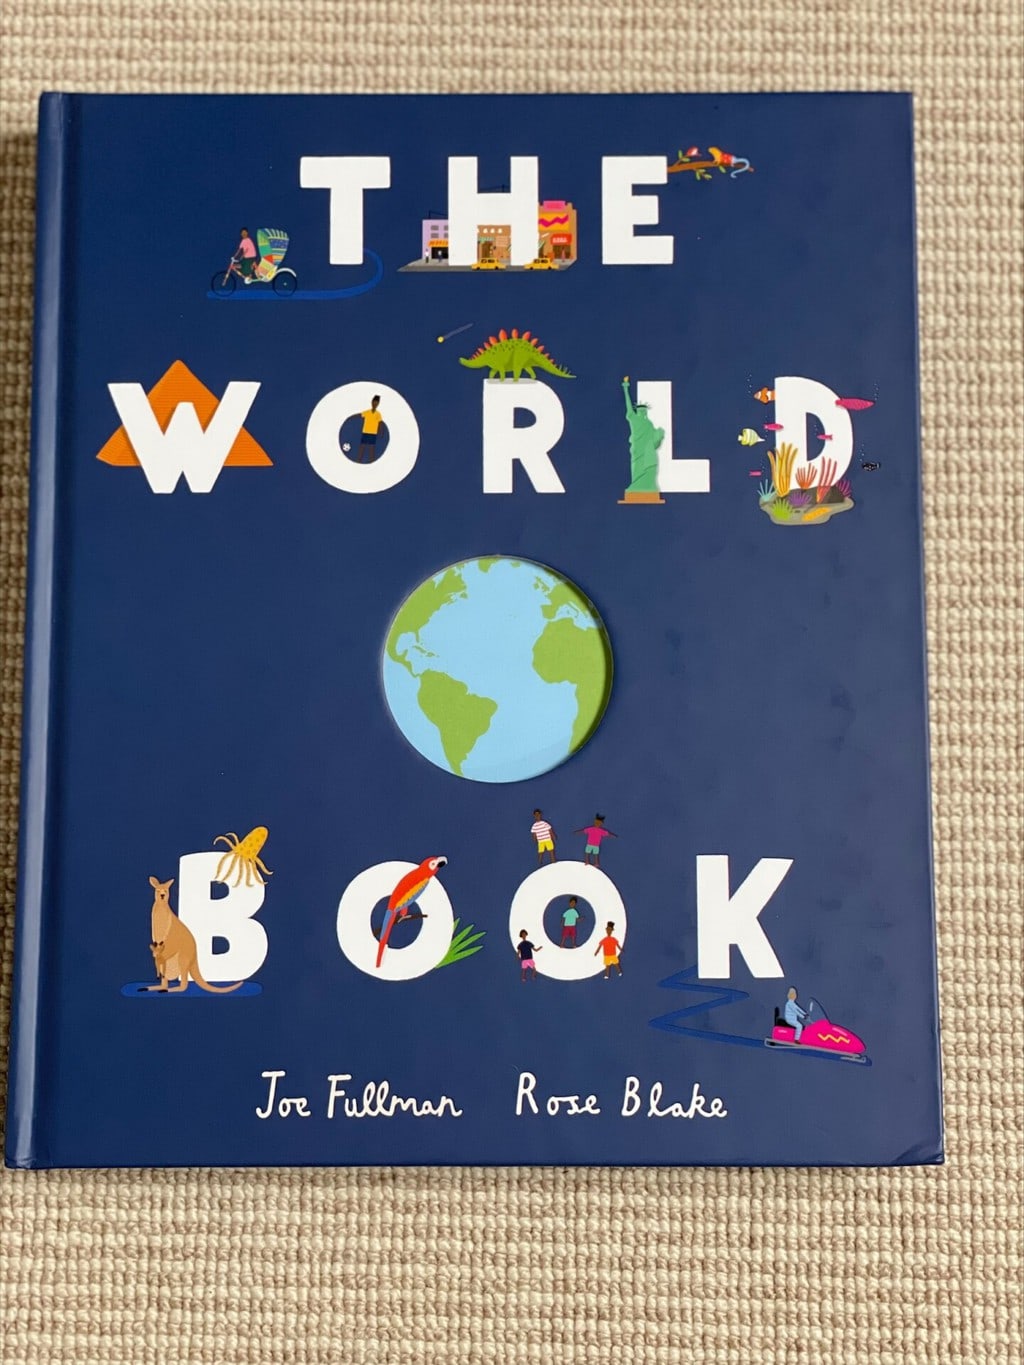 The World Book – Joe Fullman (author), Rose Blake (illustrator), Wellbeck Editions (imprint of Wellbeck Childrens Limited) (publisher)